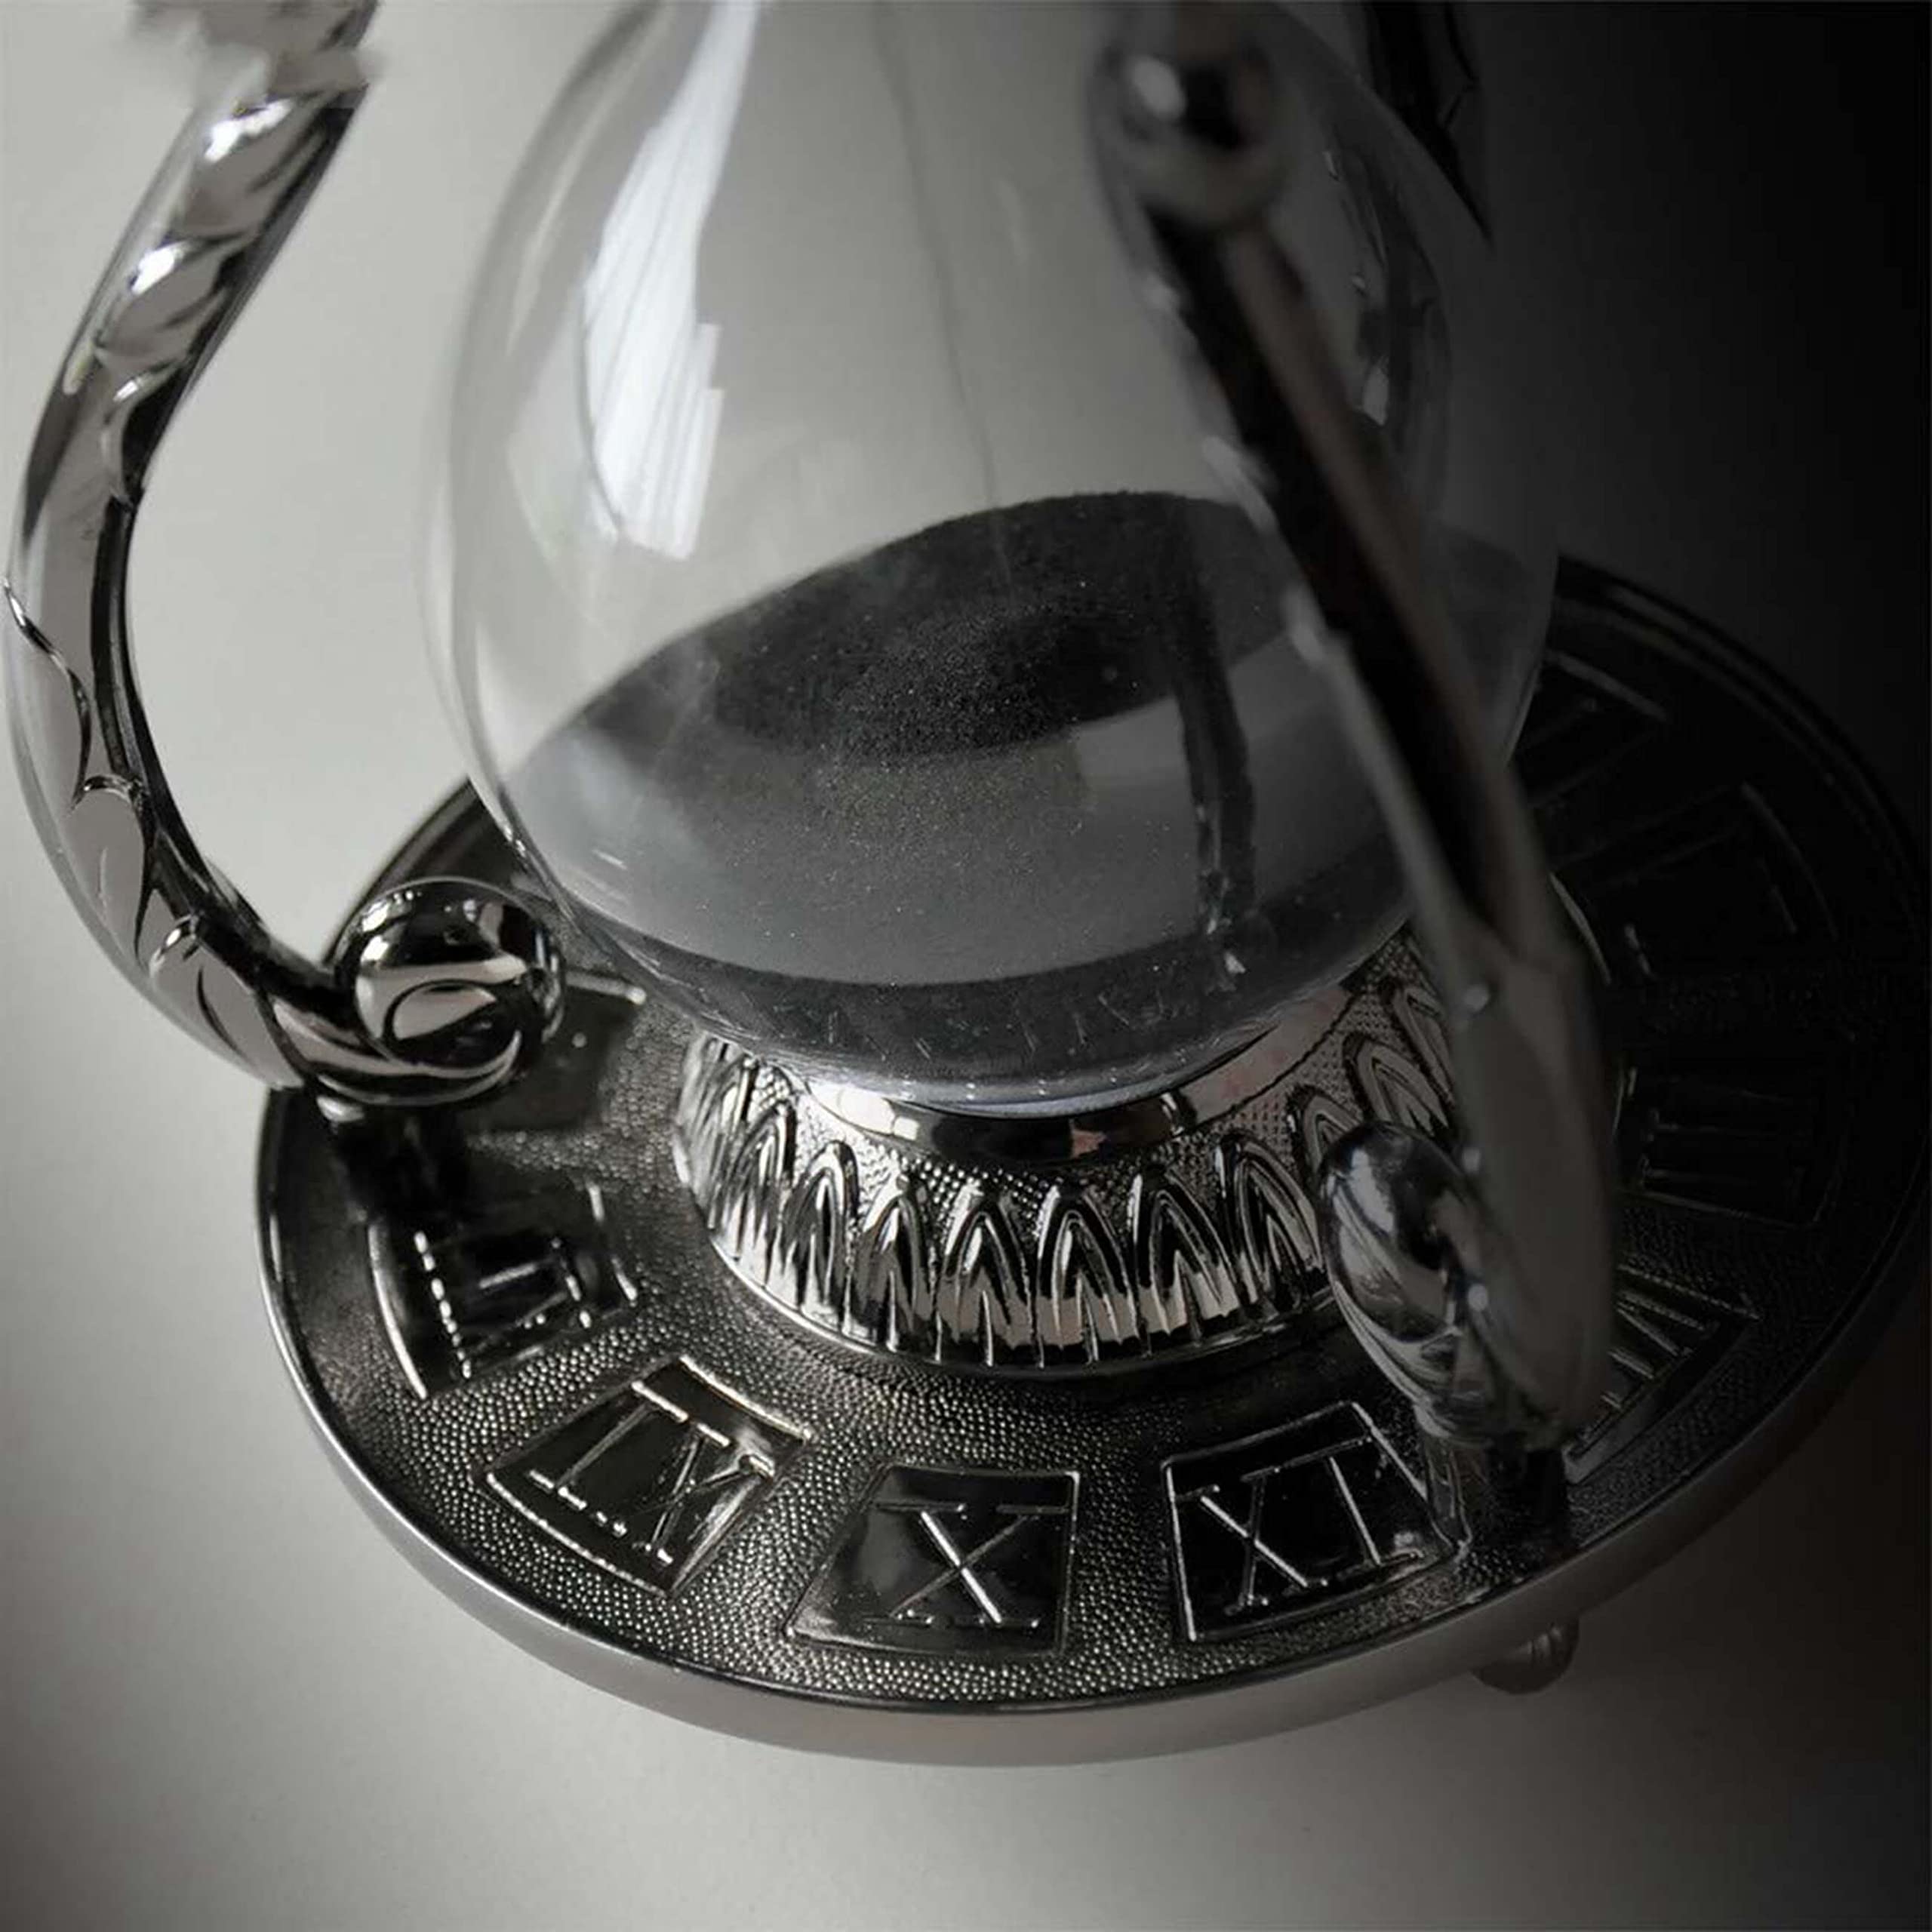 Grehge ative Hourglass Sand Timer - 30 Minute, Unique Vintage 12 Constellations Metal Art Hour Glass for Office Desk Home Decor (Scorpio)